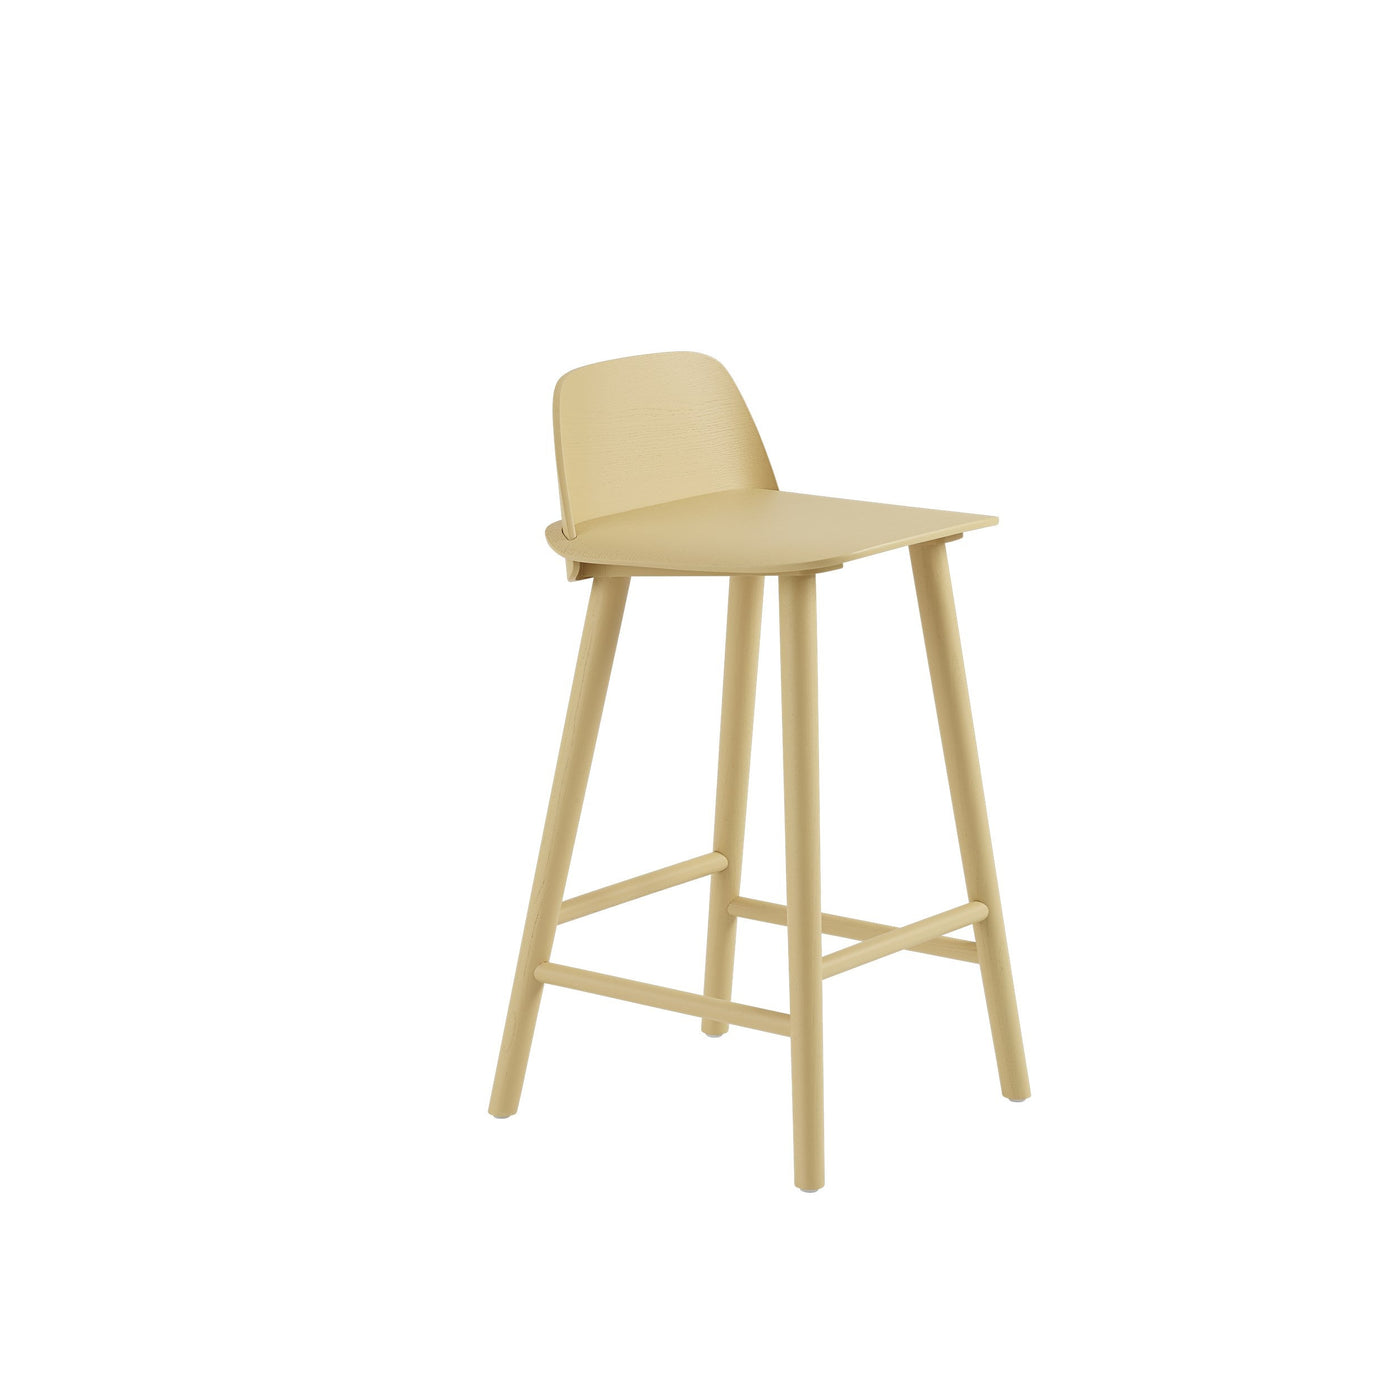 Muuto Nerd counter stool. Shop online at someday designs. #colour_sand-yellow